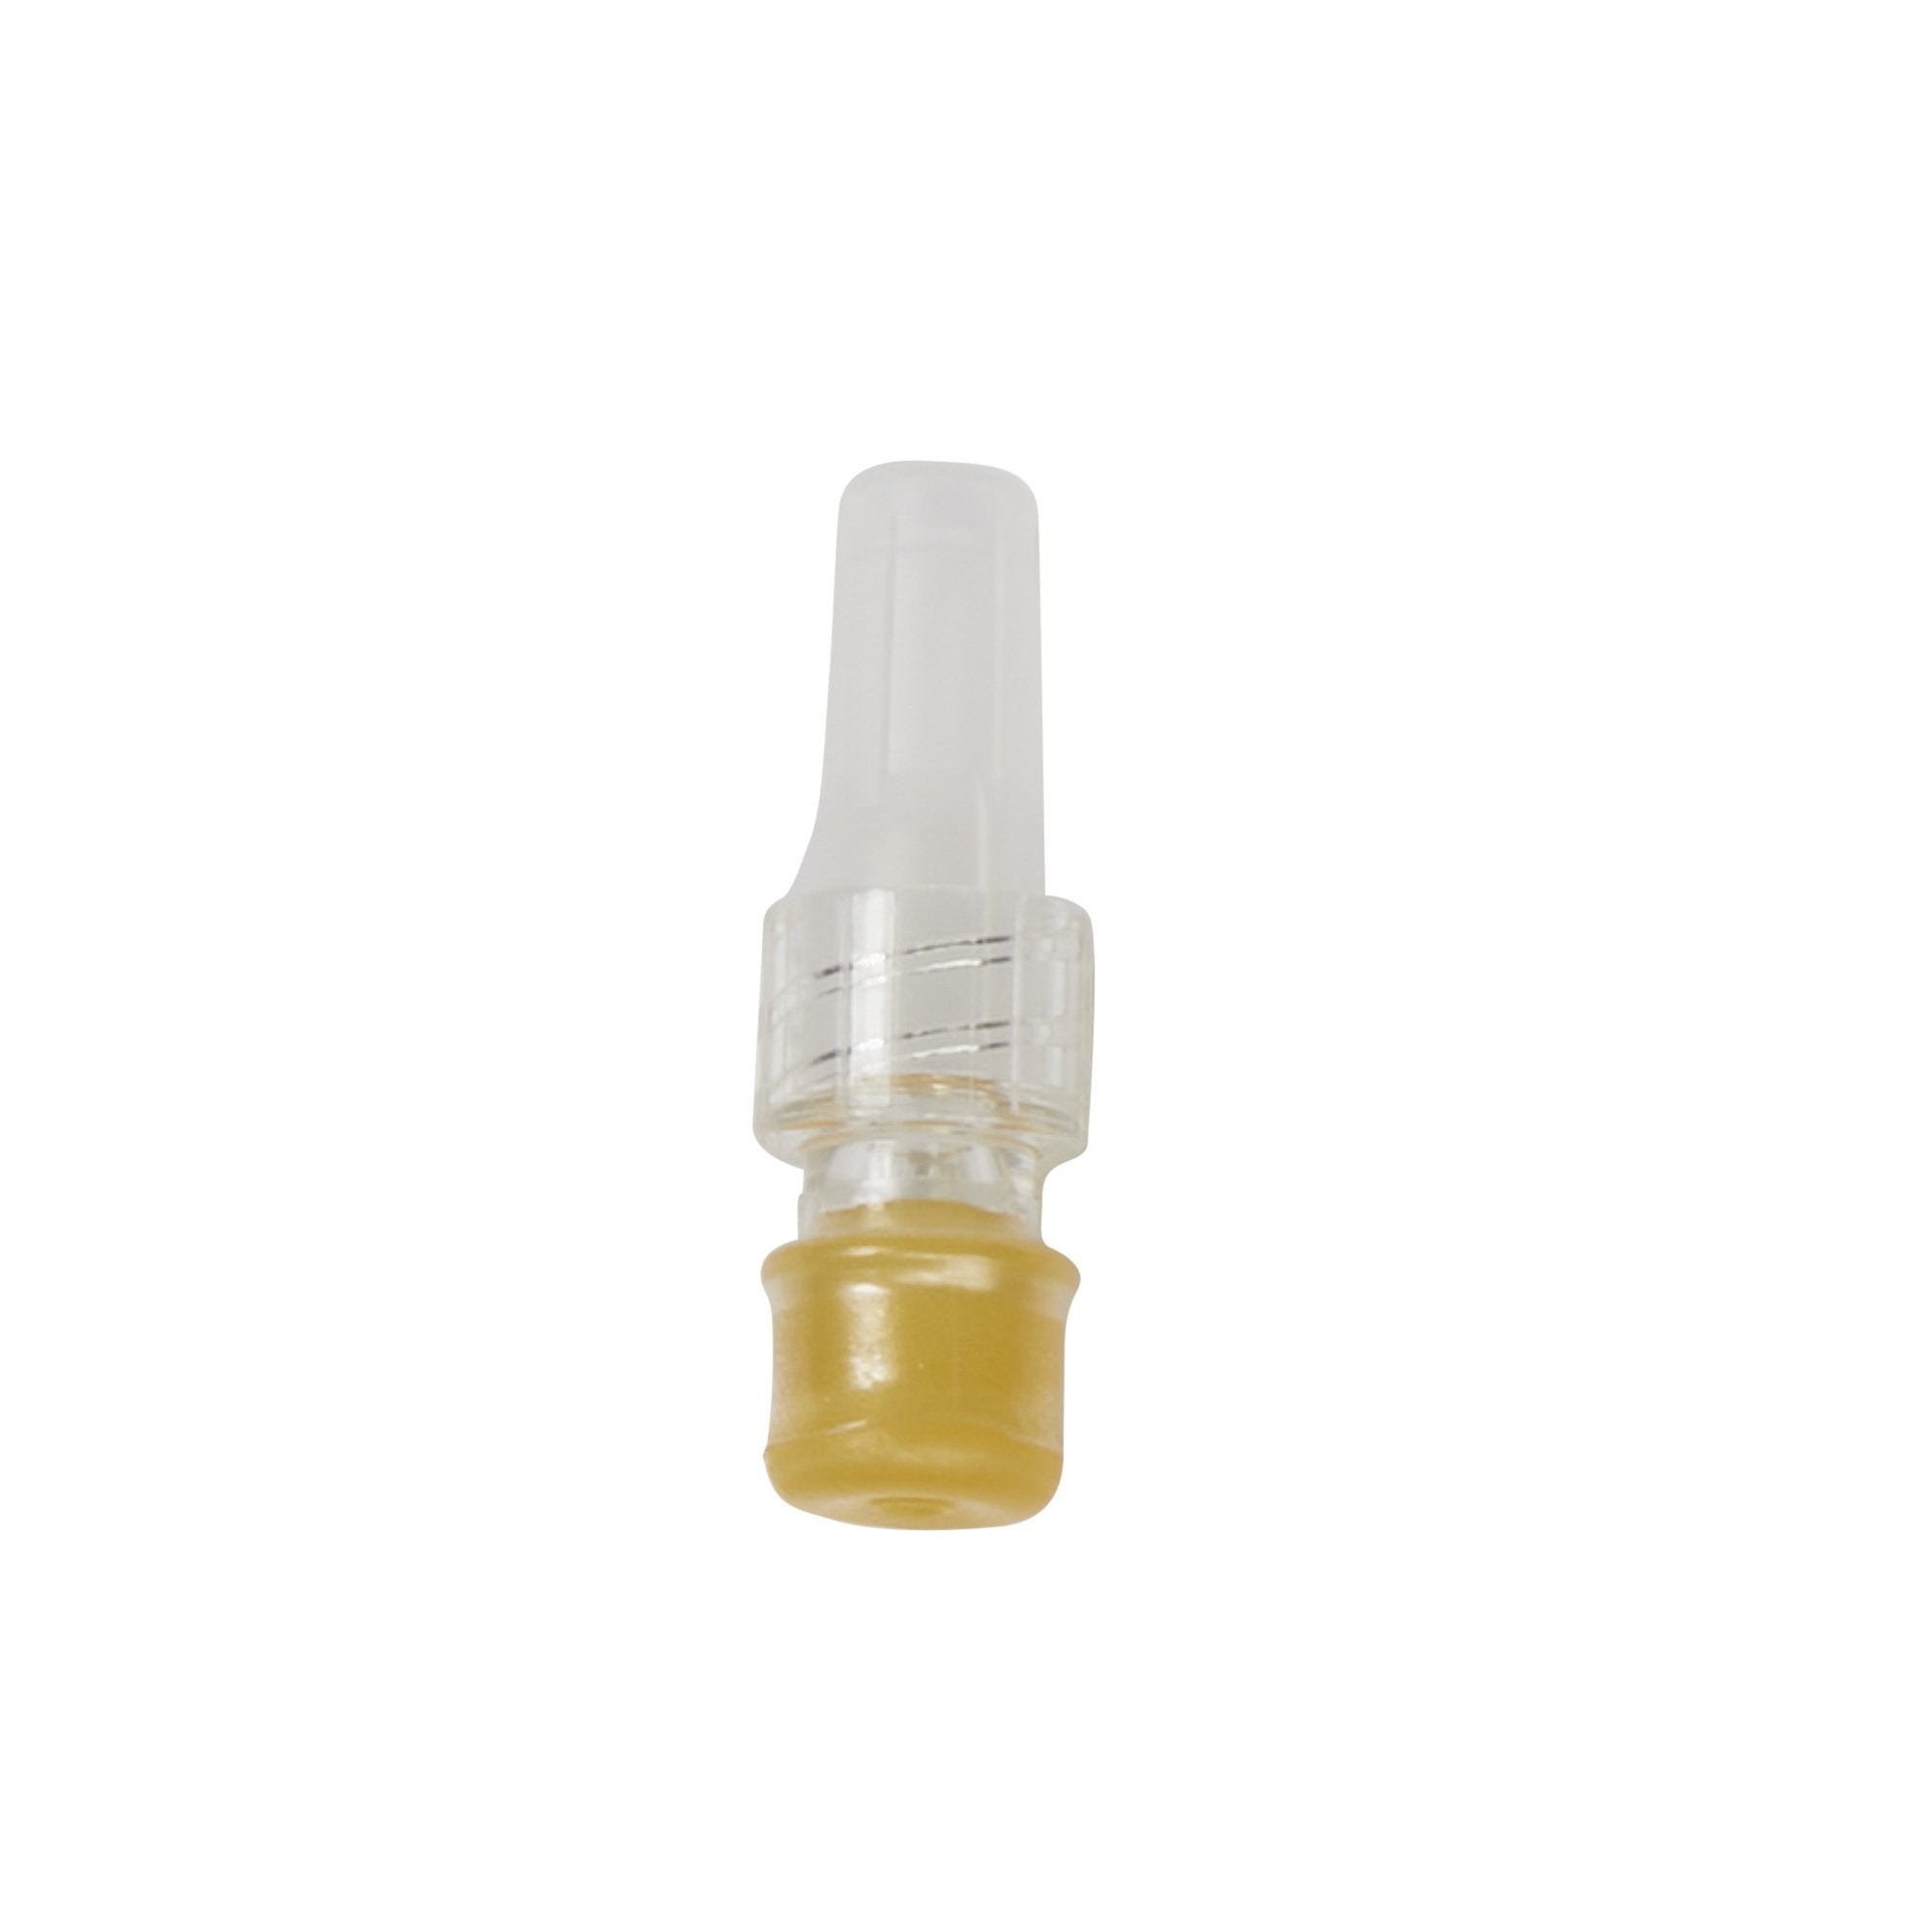 Cap, Intermittent Injection Priming Volume 0.1 mL, Length 3/4 Inch, Proximal Injection Port, Distal Male Luer Lock Connector, DEHP-free,